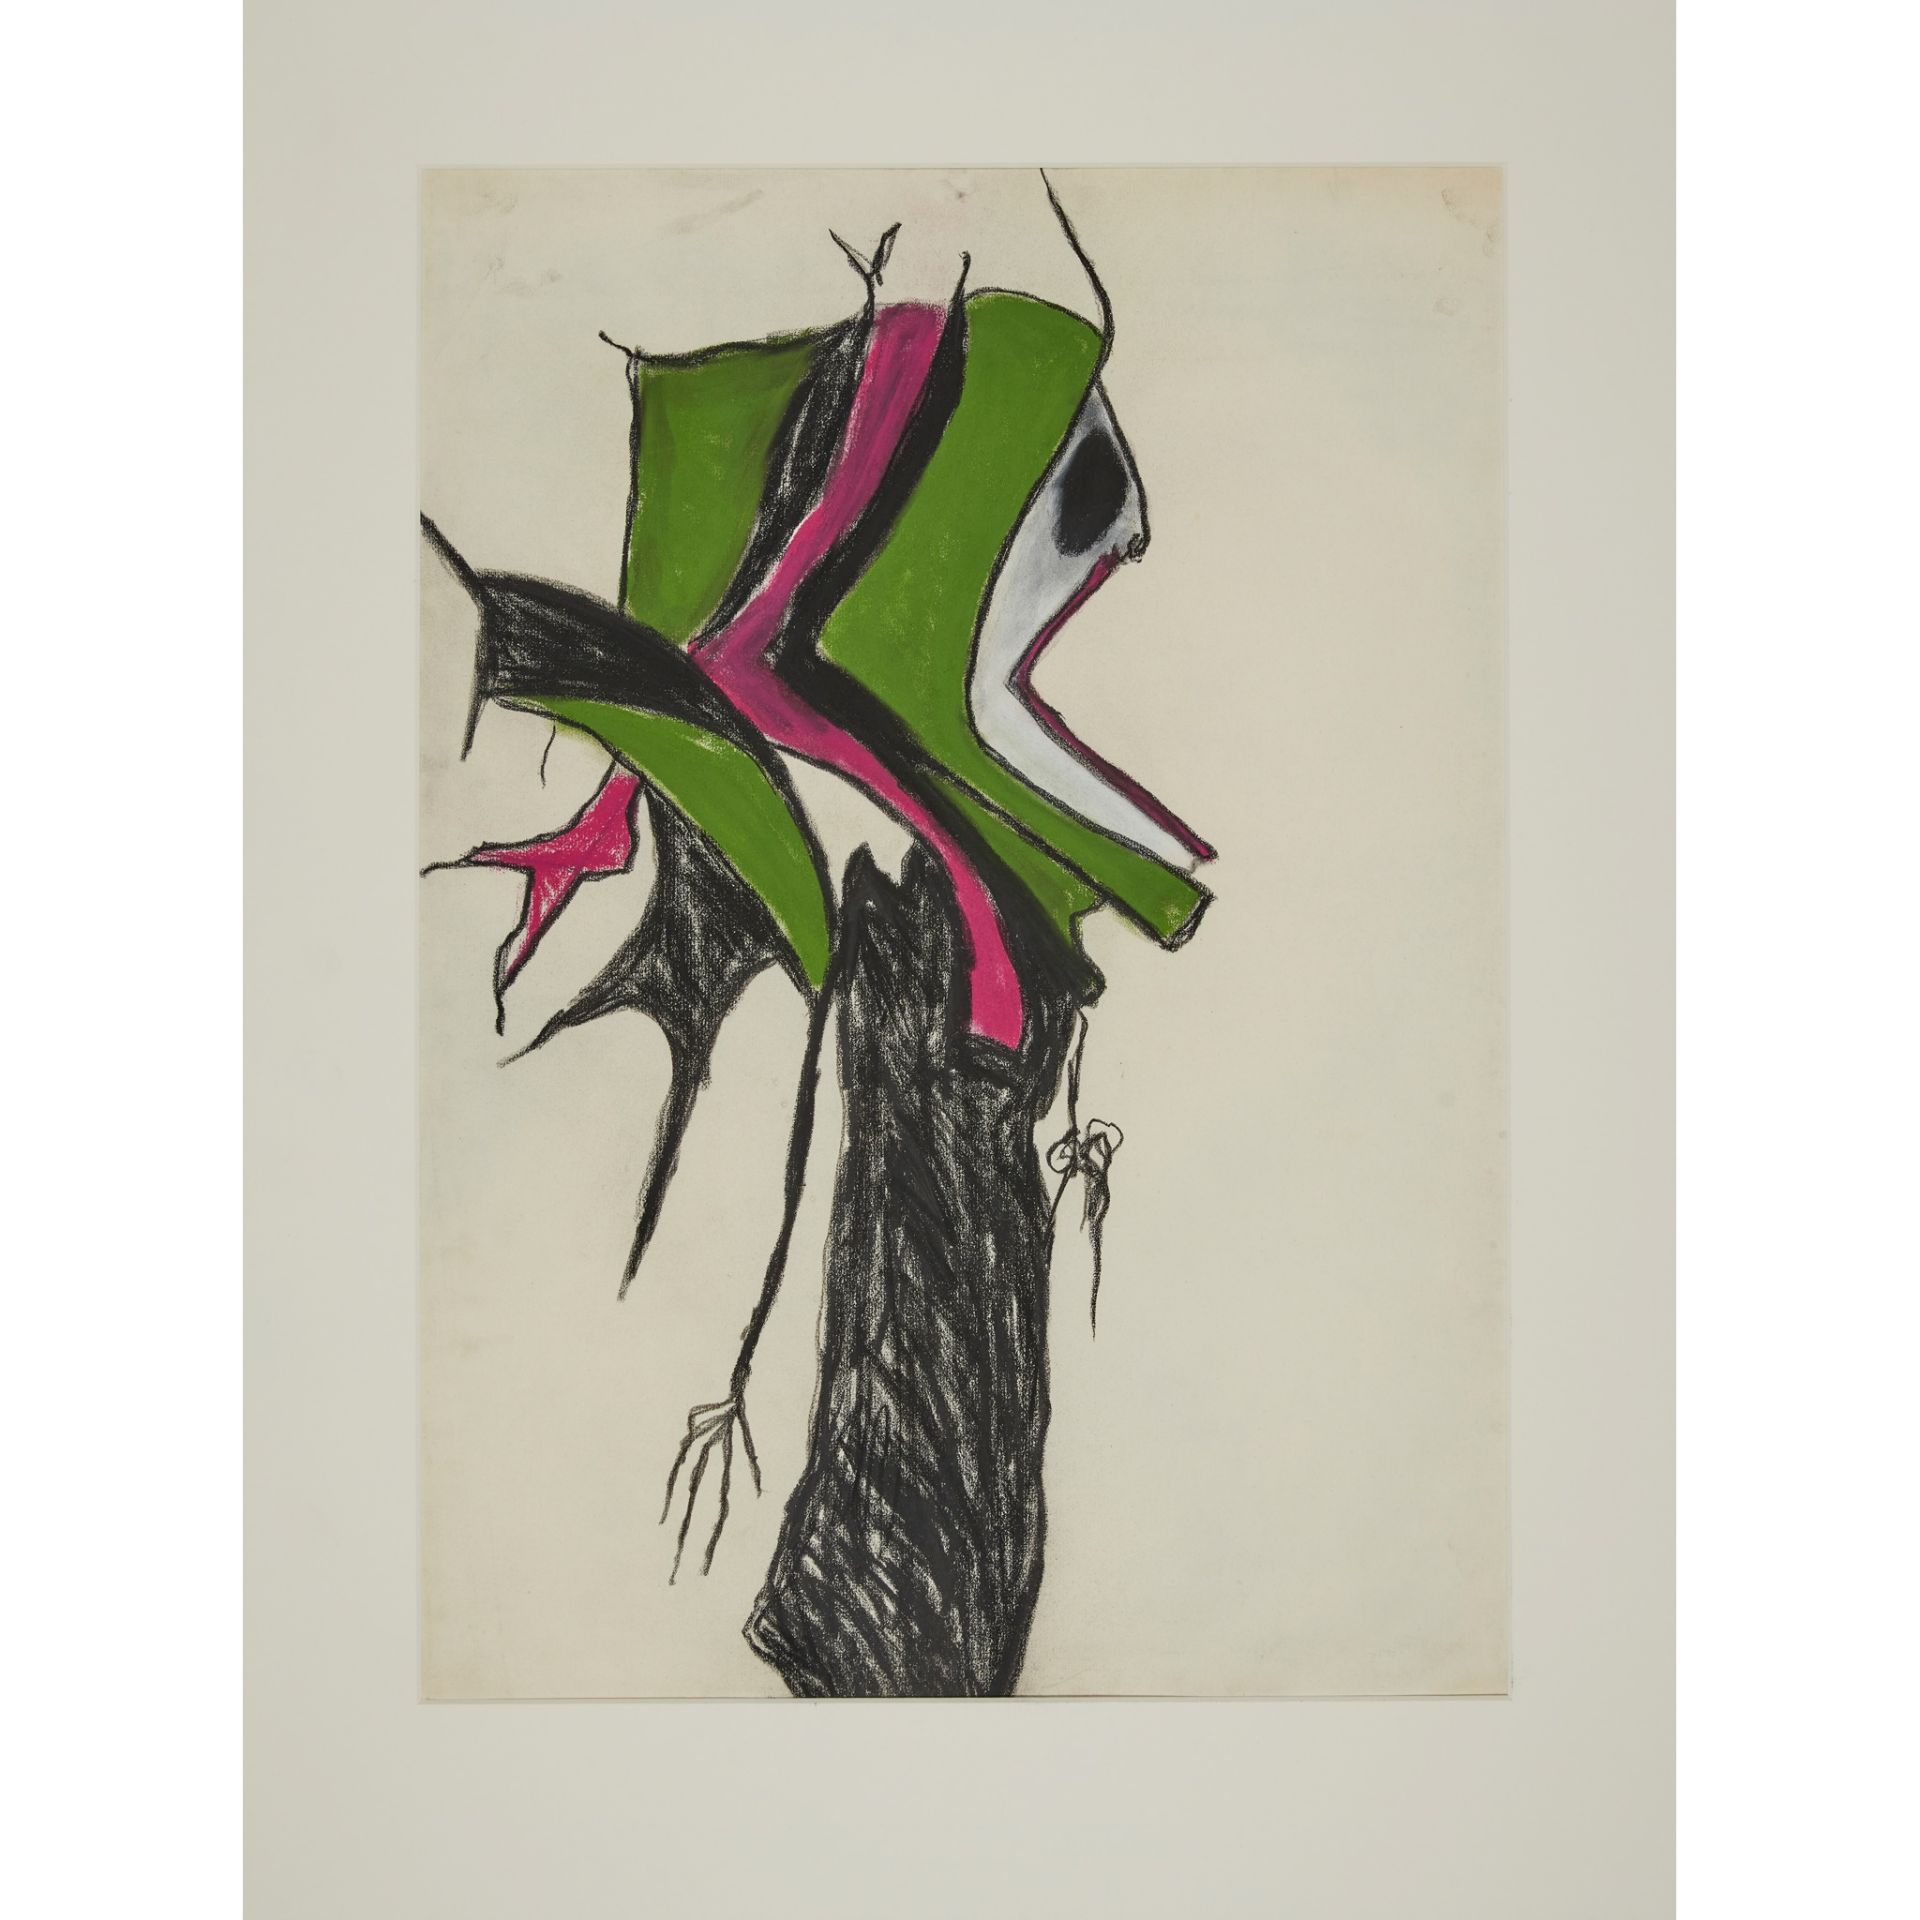 § PATRICIA DOUTHWAITE (SCOTTISH 1939-2002) SCREAMING (WITH GREEN AND PINK HEADDRESS) - Image 2 of 2